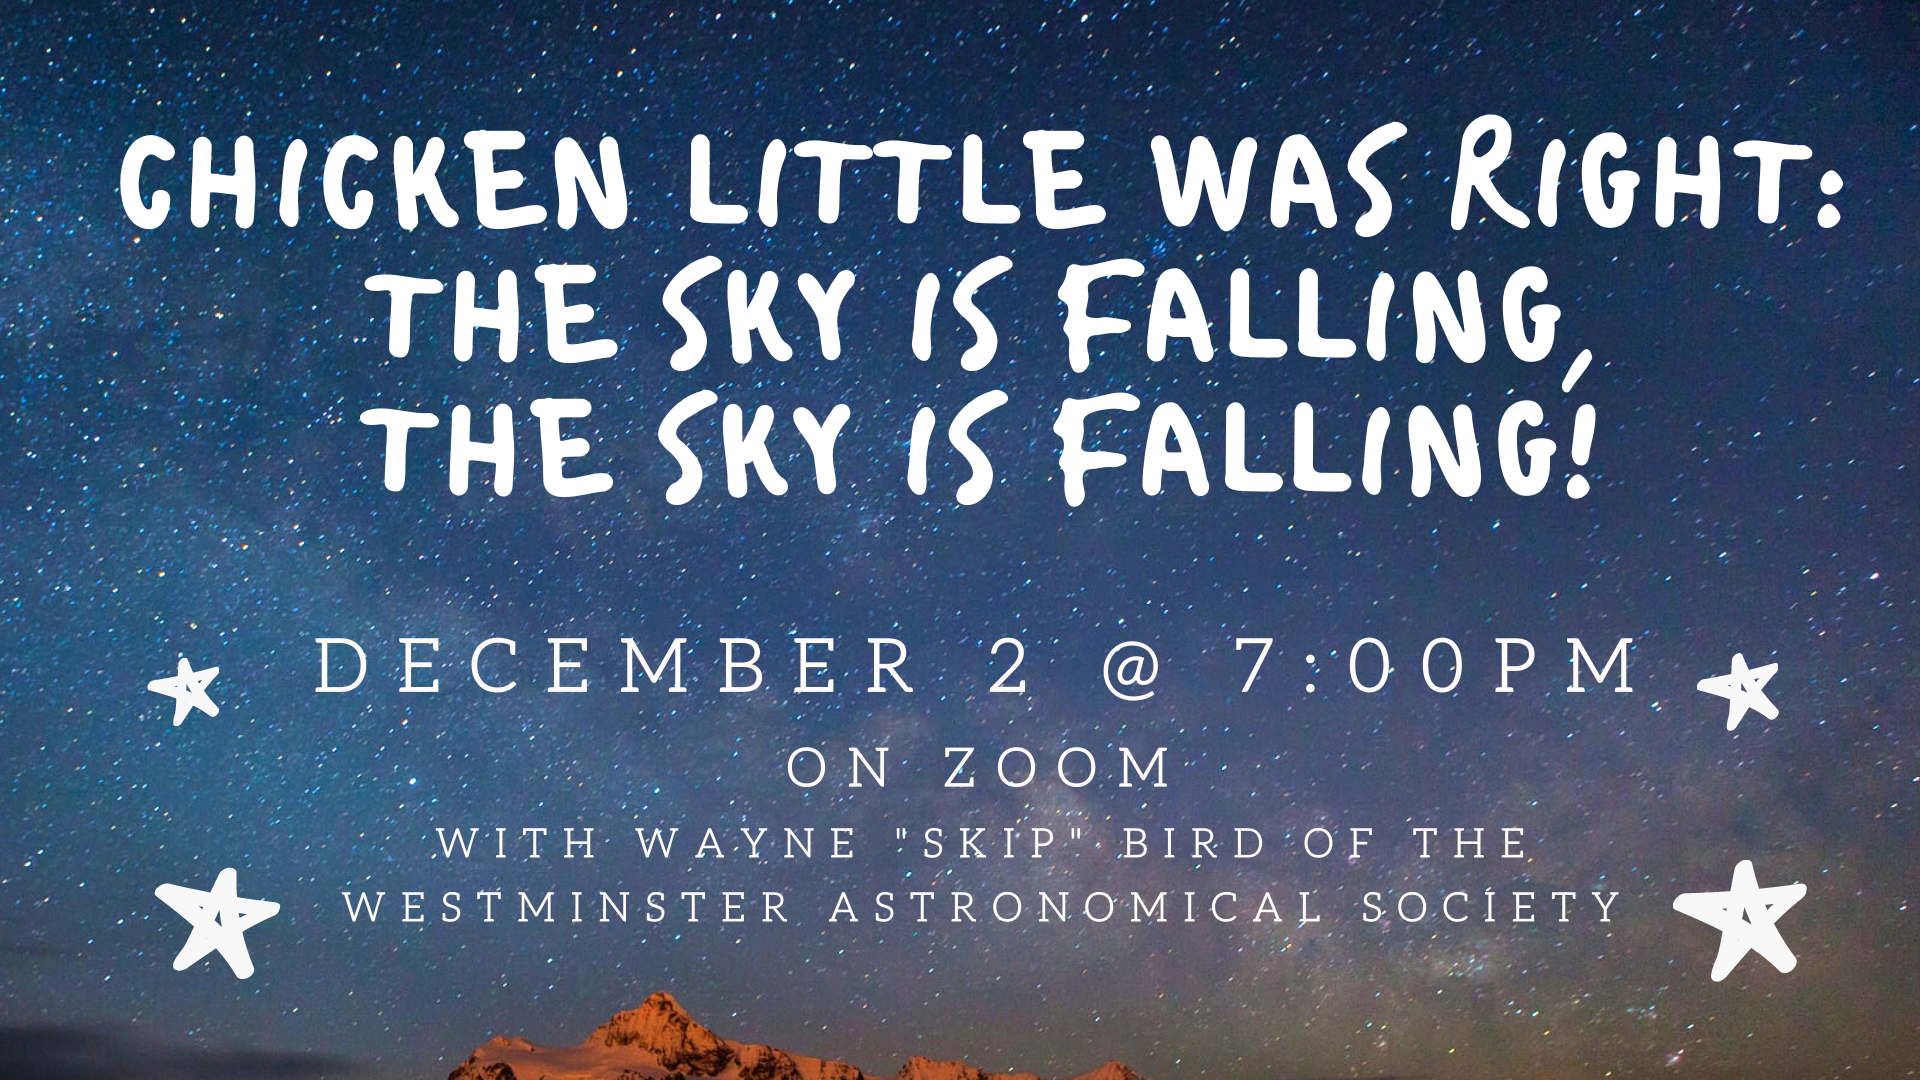 Zoom program by the Westminster Astronomical Society on December 2 at 7:00pm.